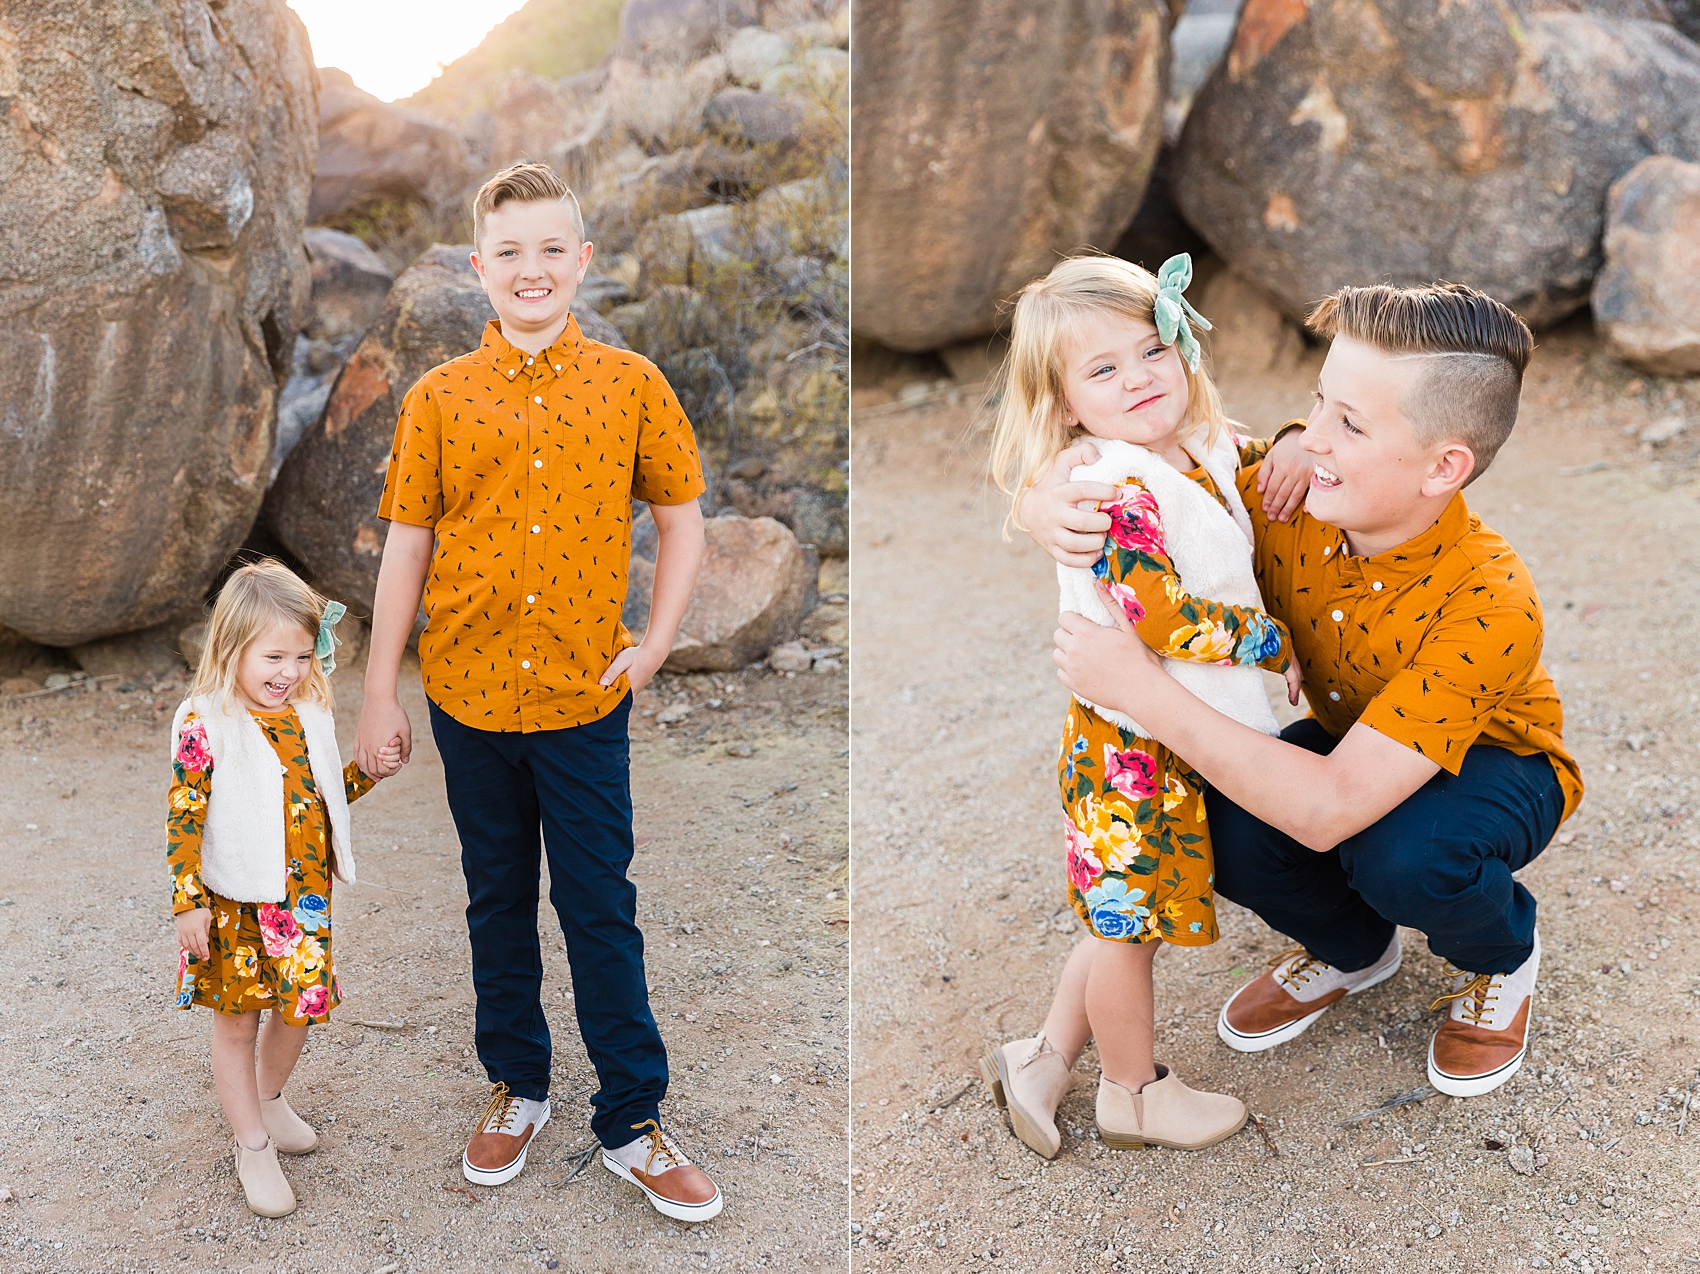 Leah Hope Photography | Scottsdale Phoenix Arizona | Desert Landscape Cactus Boulders Scenery | Family Pictures | What to Wear | Family Poses